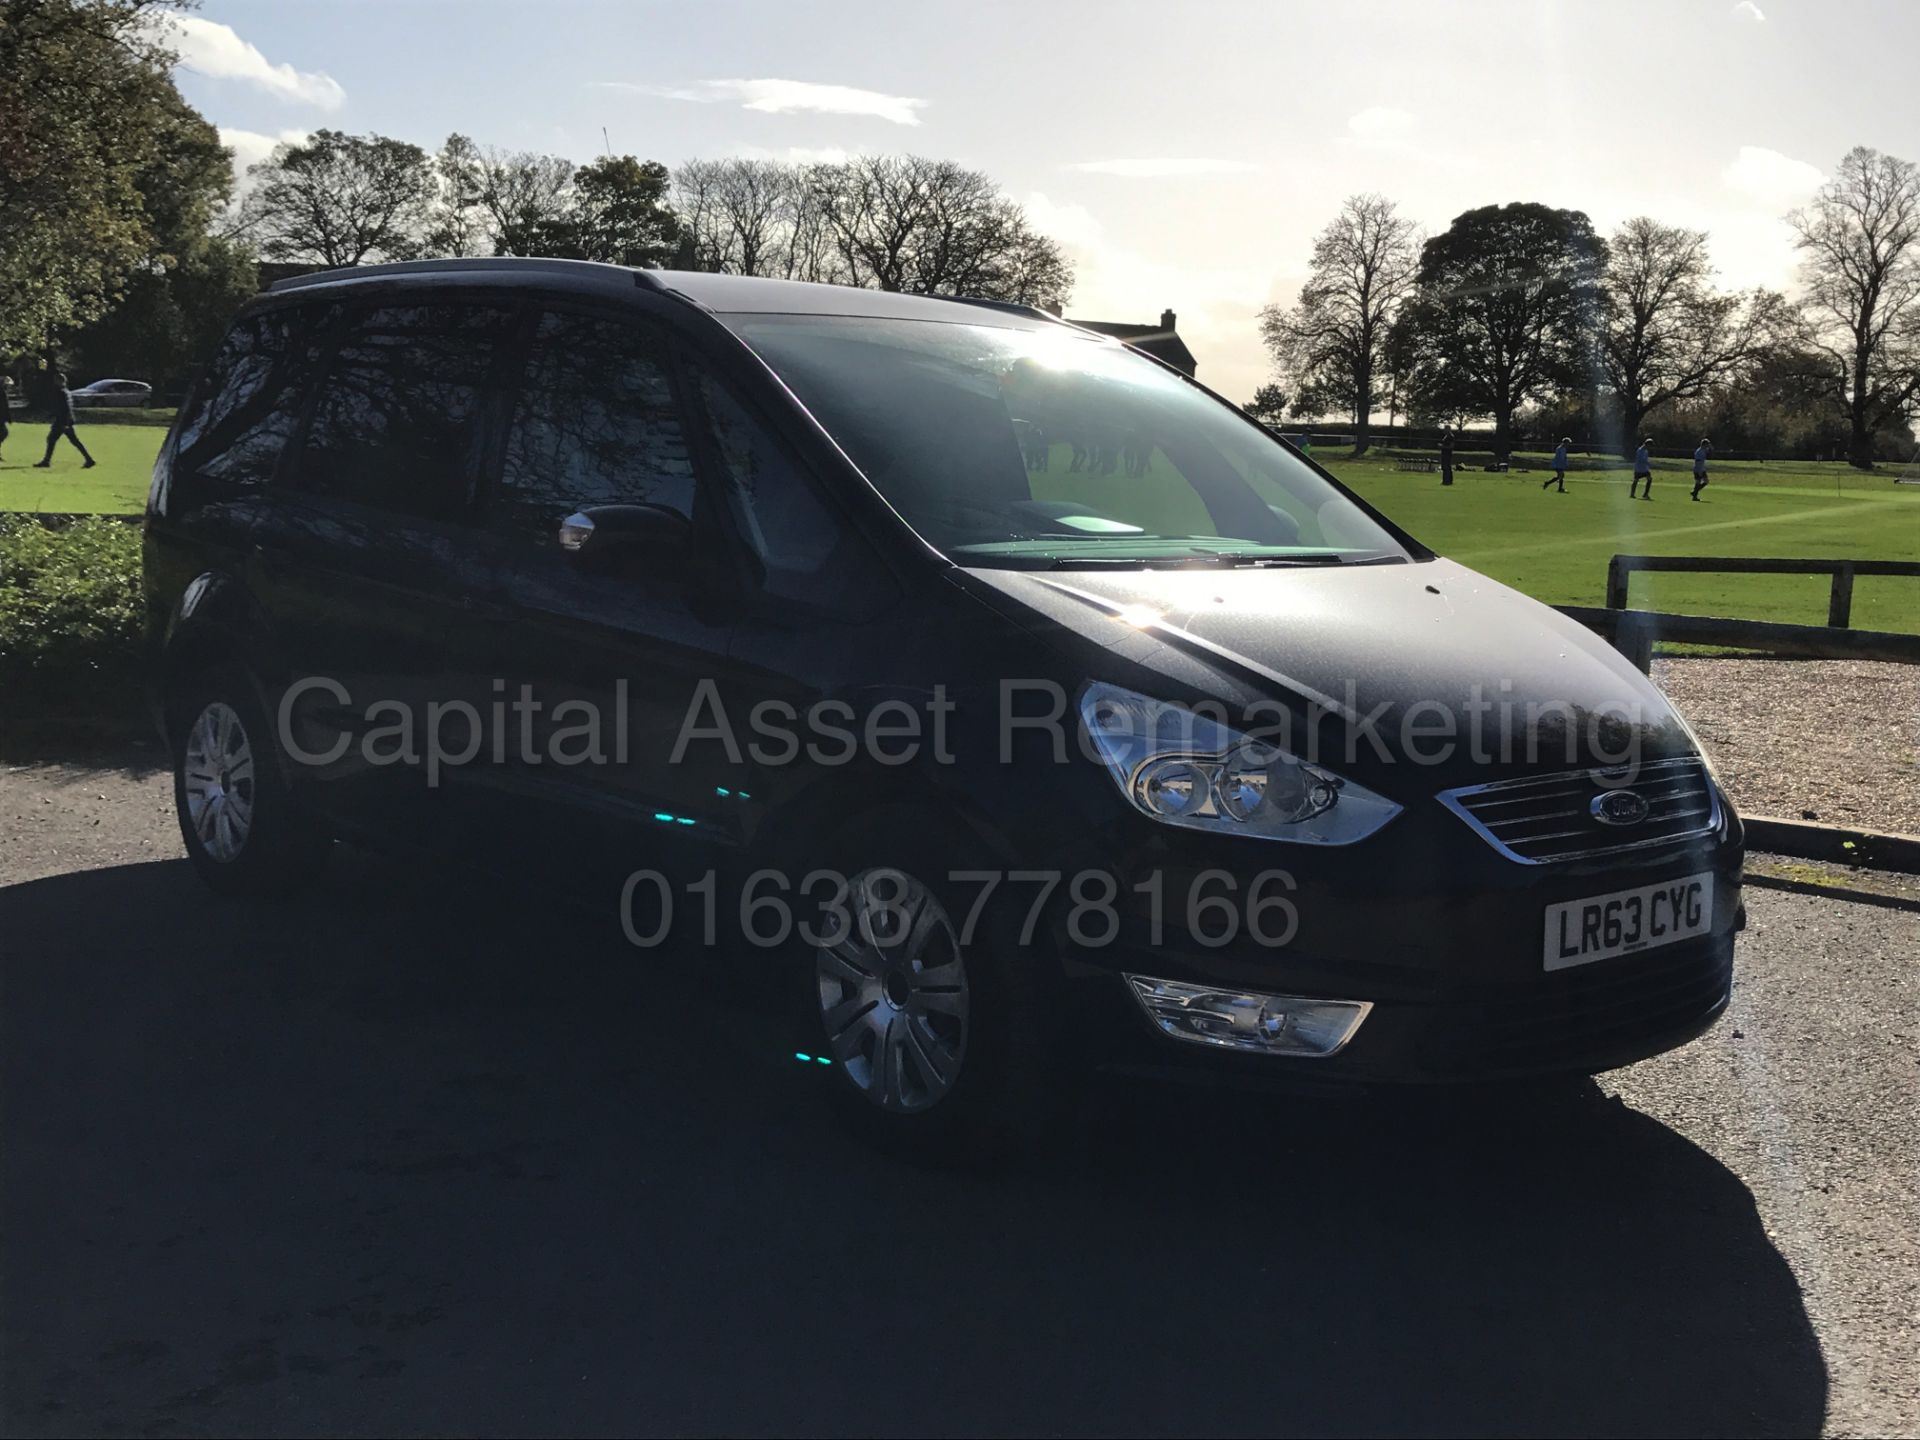 (ON SALE) FORD GALAXY 'ZETEC' 7 SEATER MPV (2014 MODEL) '2.0 TDCI -140 BHP' (1 OWNER) *FULL HISTORY* - Image 9 of 28